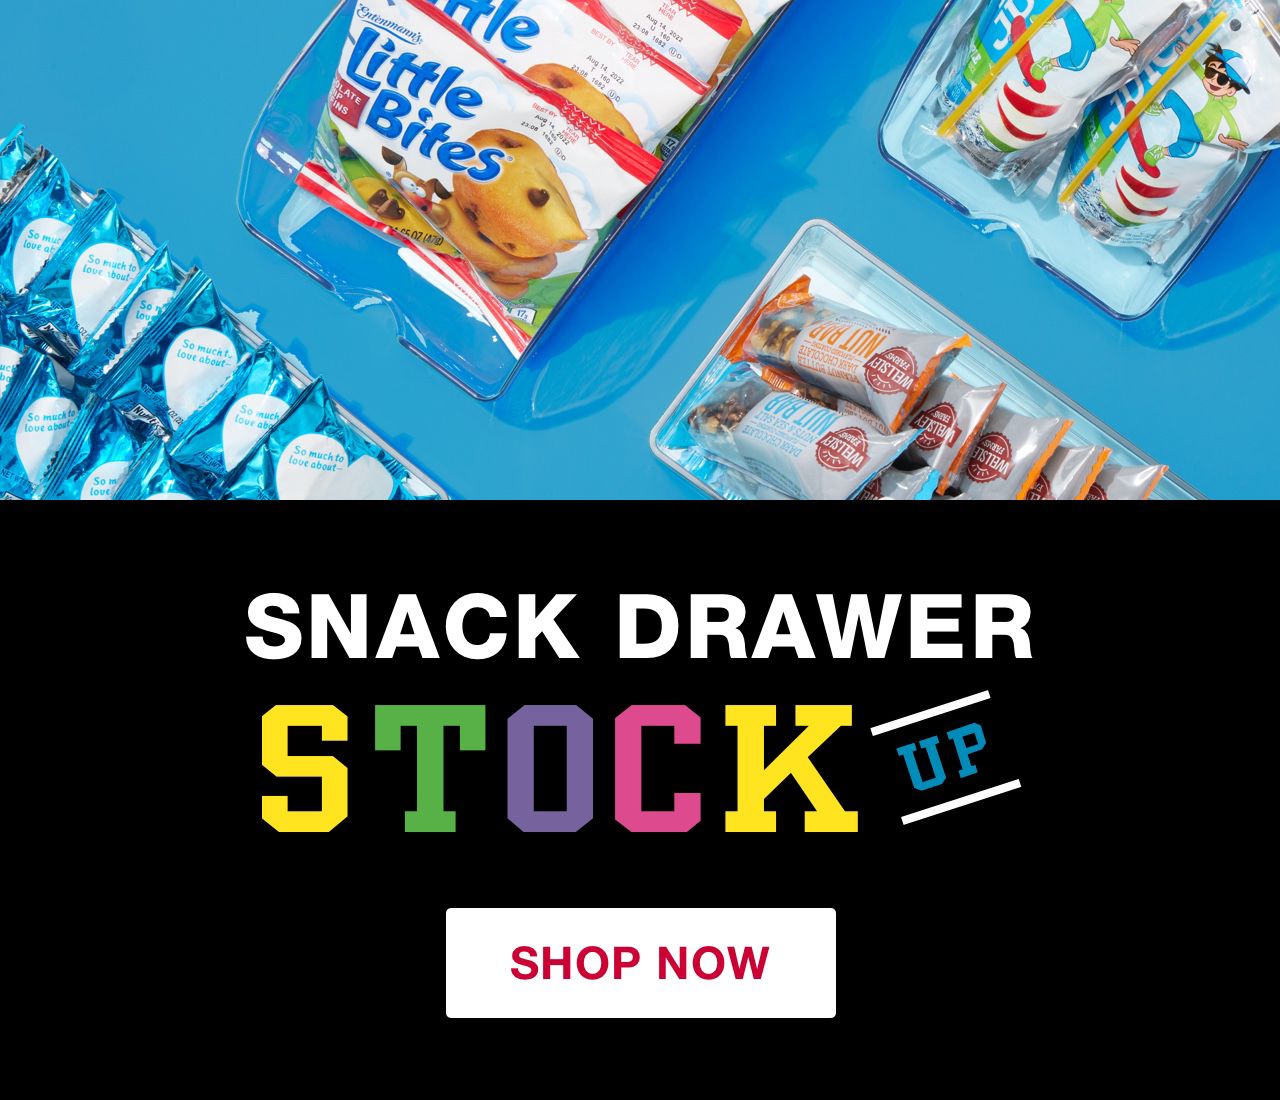 Snack Drawer Stock Up. Click to shop now.